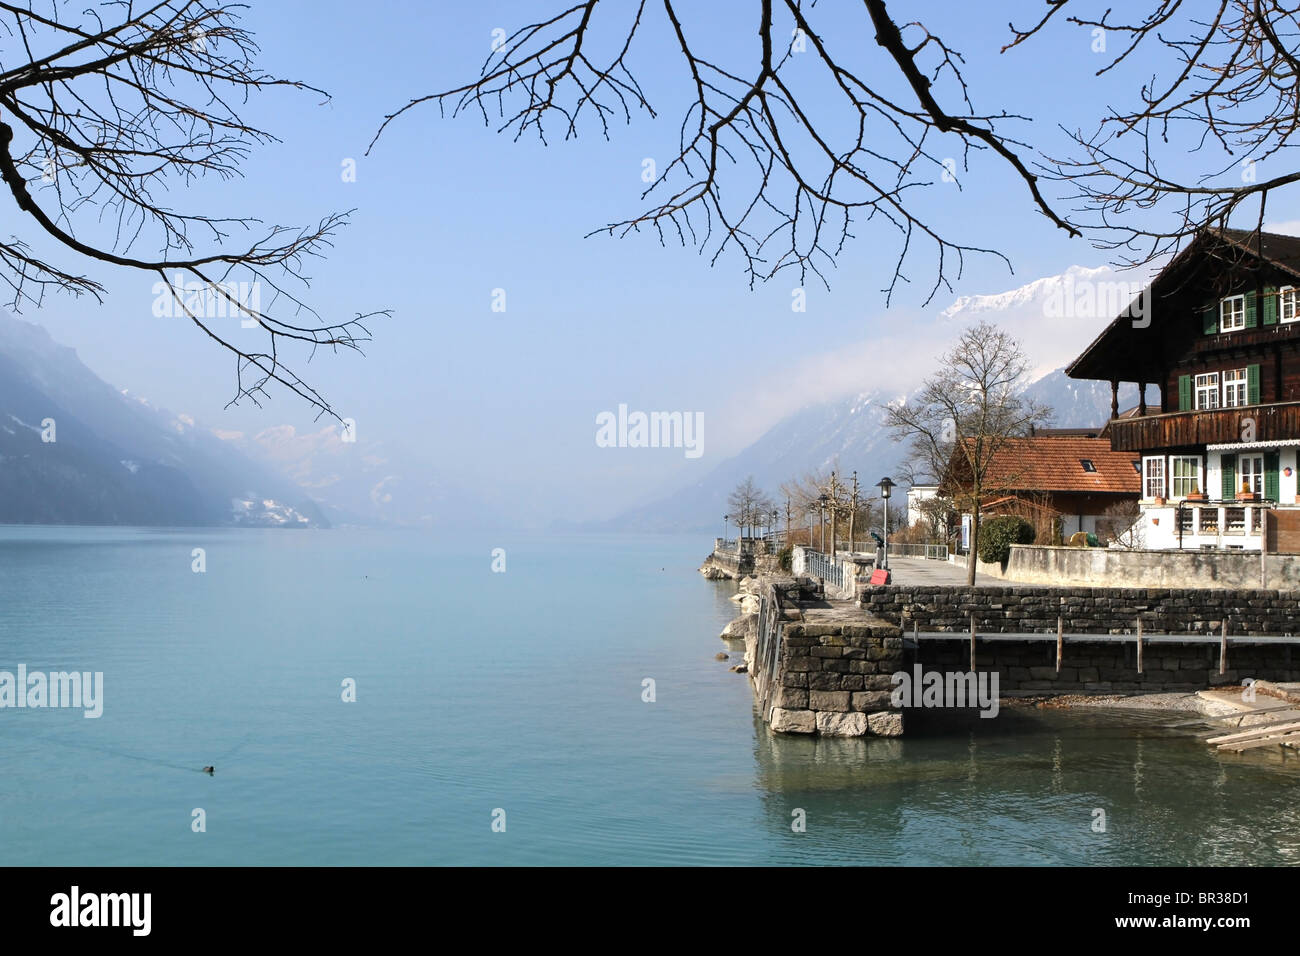 Typical Swiss chalet close to Lake Brienz in the town of Brienz, Berne Canton, Switzerland. Stock Photo